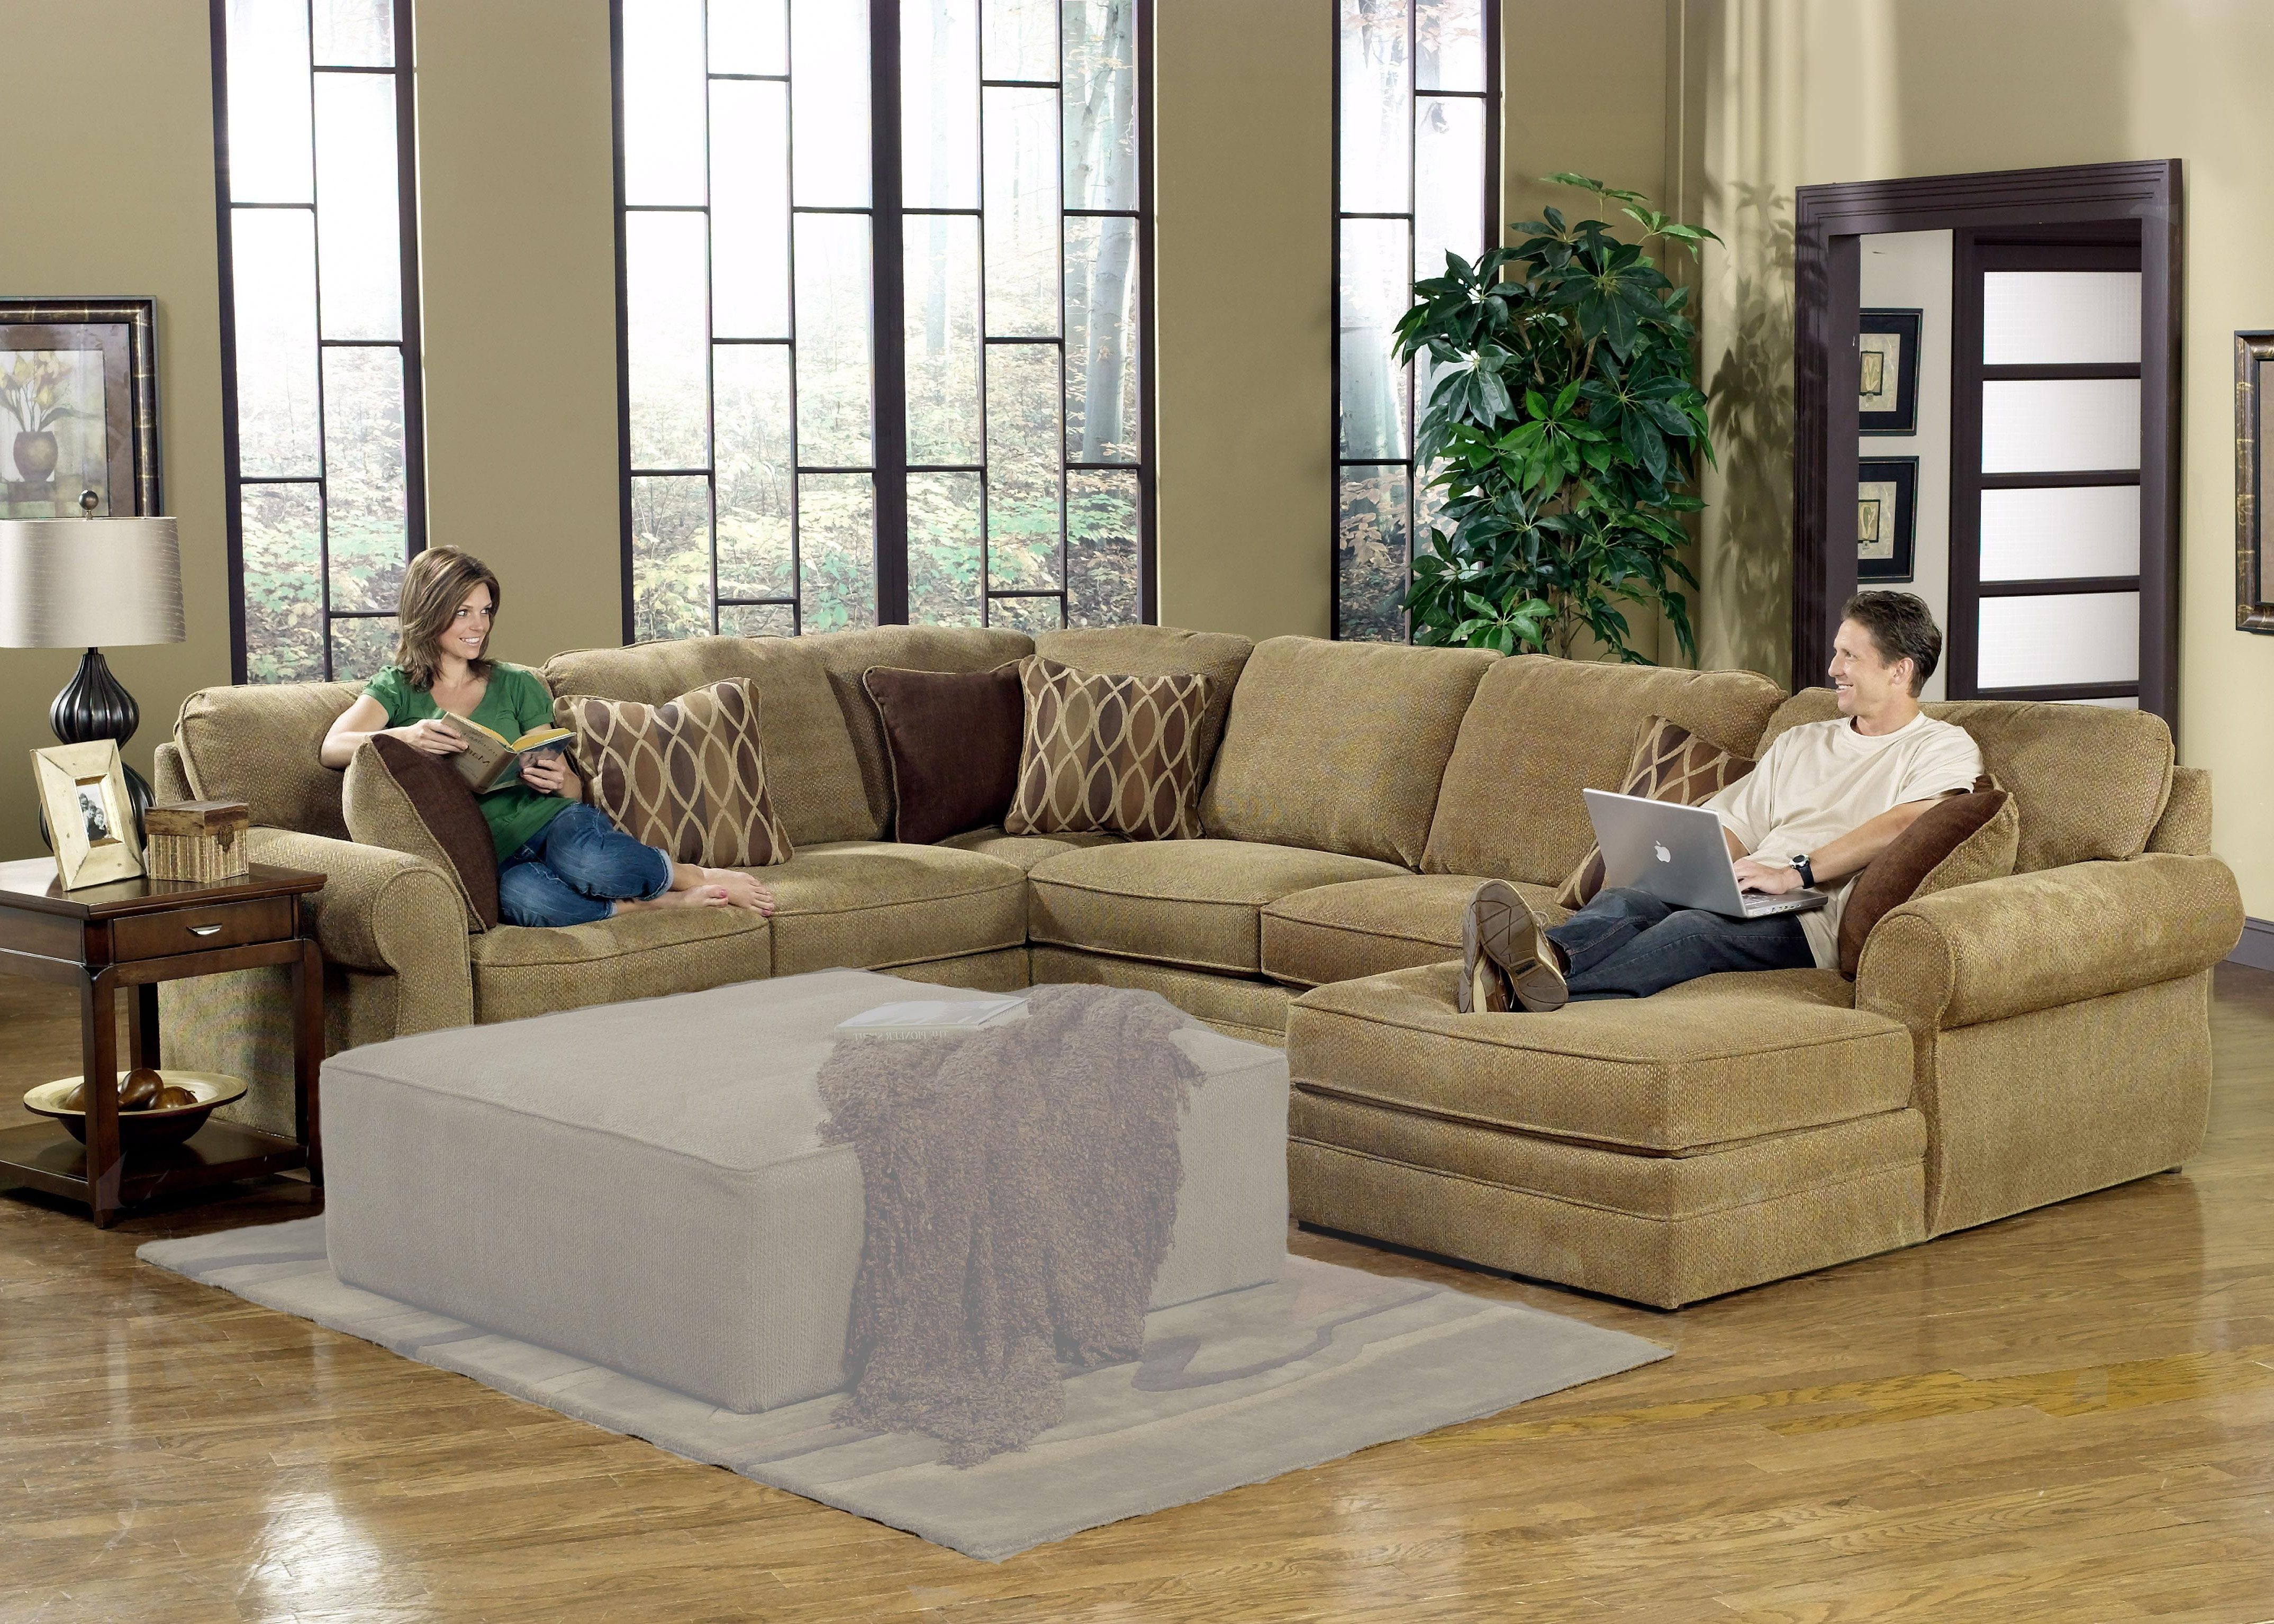 Modern Style U Shaped Sectional Sofa With Home Living Room Sofas Pertaining To Widely Used Modern U Shaped Sectional Sofas (View 3 of 15)